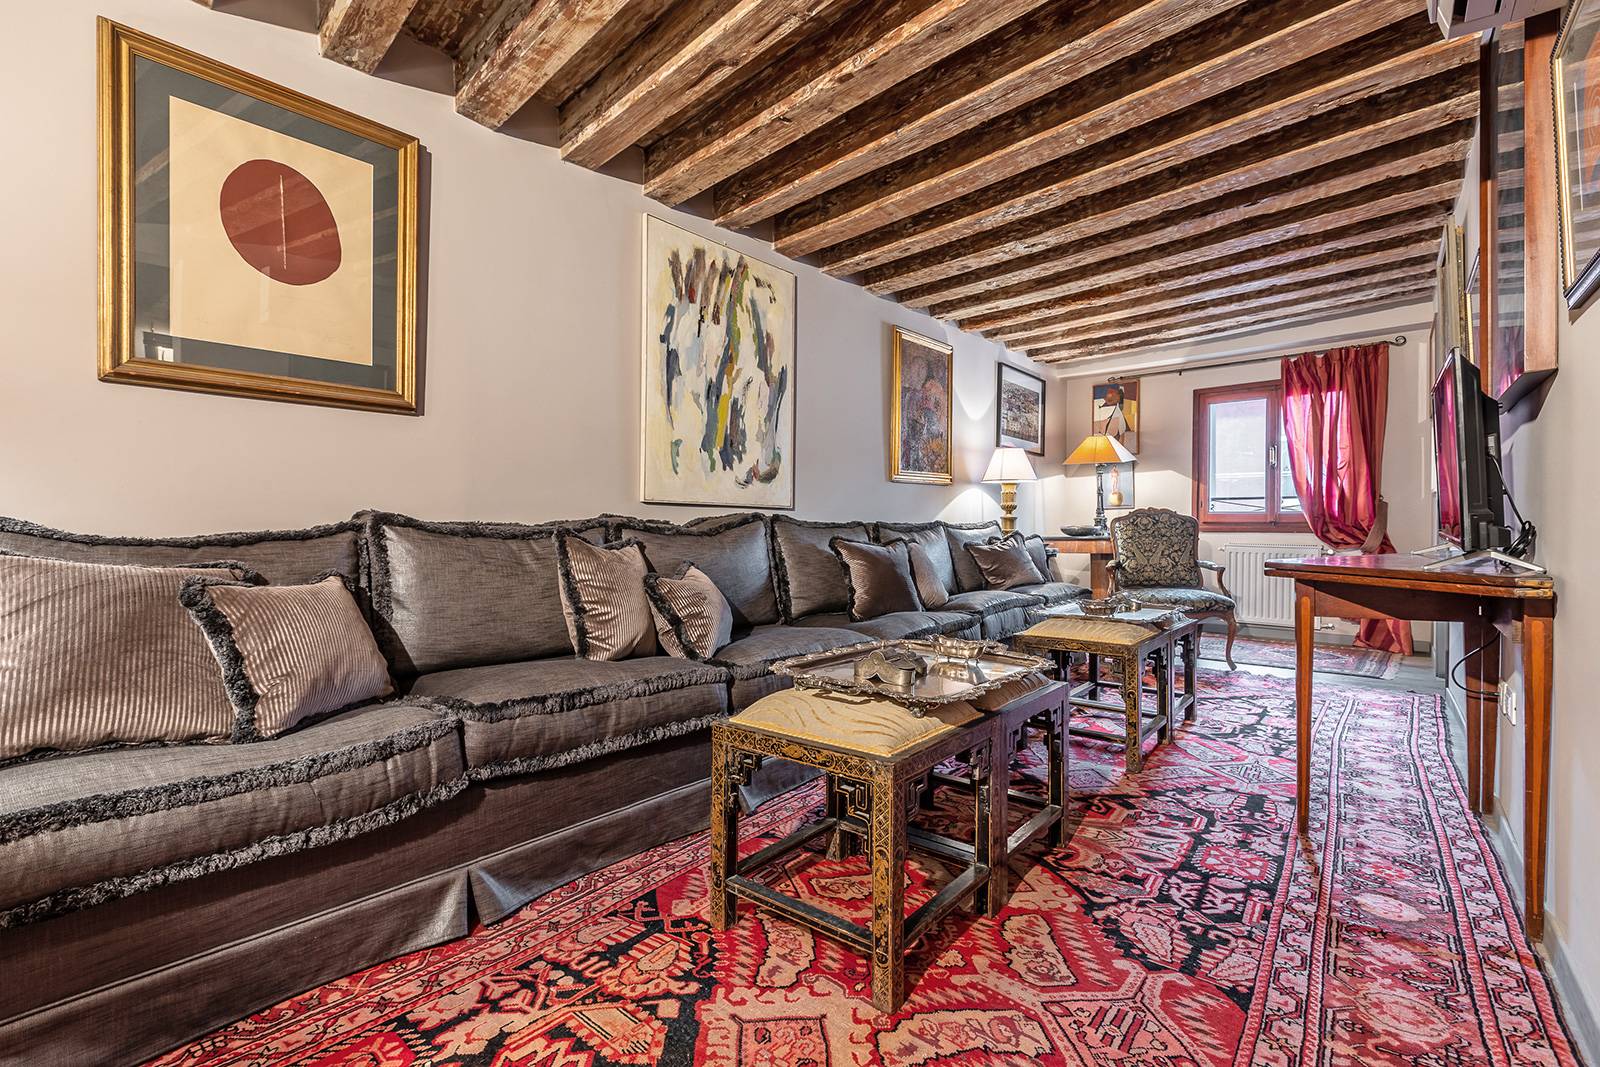 the living room is rich and cozy, furnished with antiques, paintings and textiles